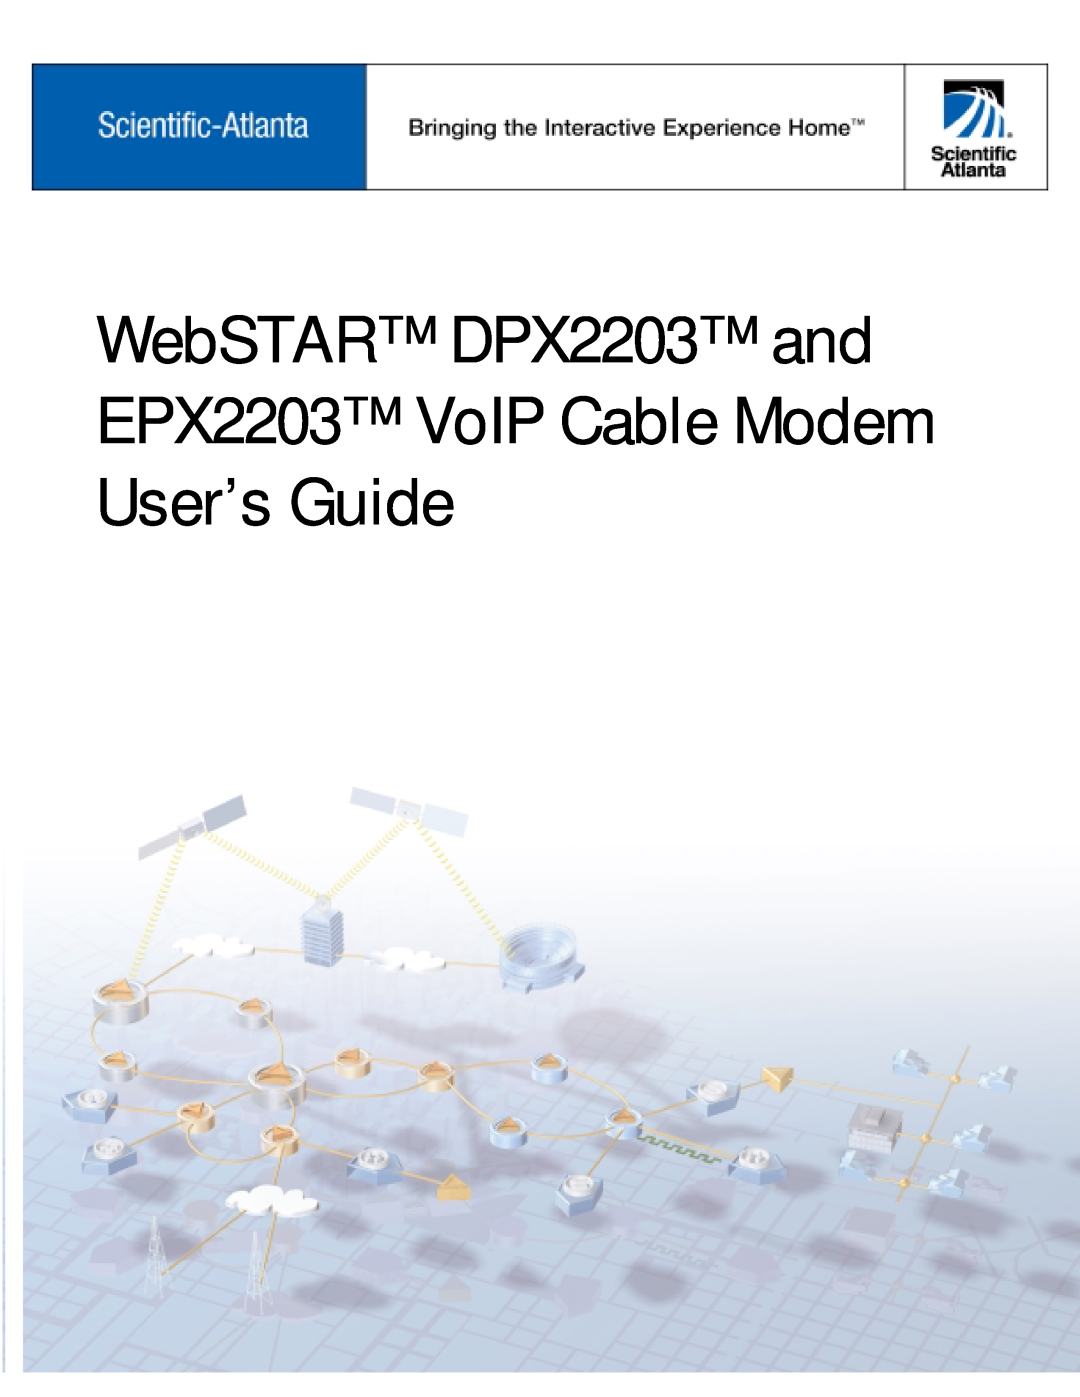 Scientific Atlanta manual WebSTAR DPX2203 and EPX2203 VoIP Cable Modem User’s Guide 